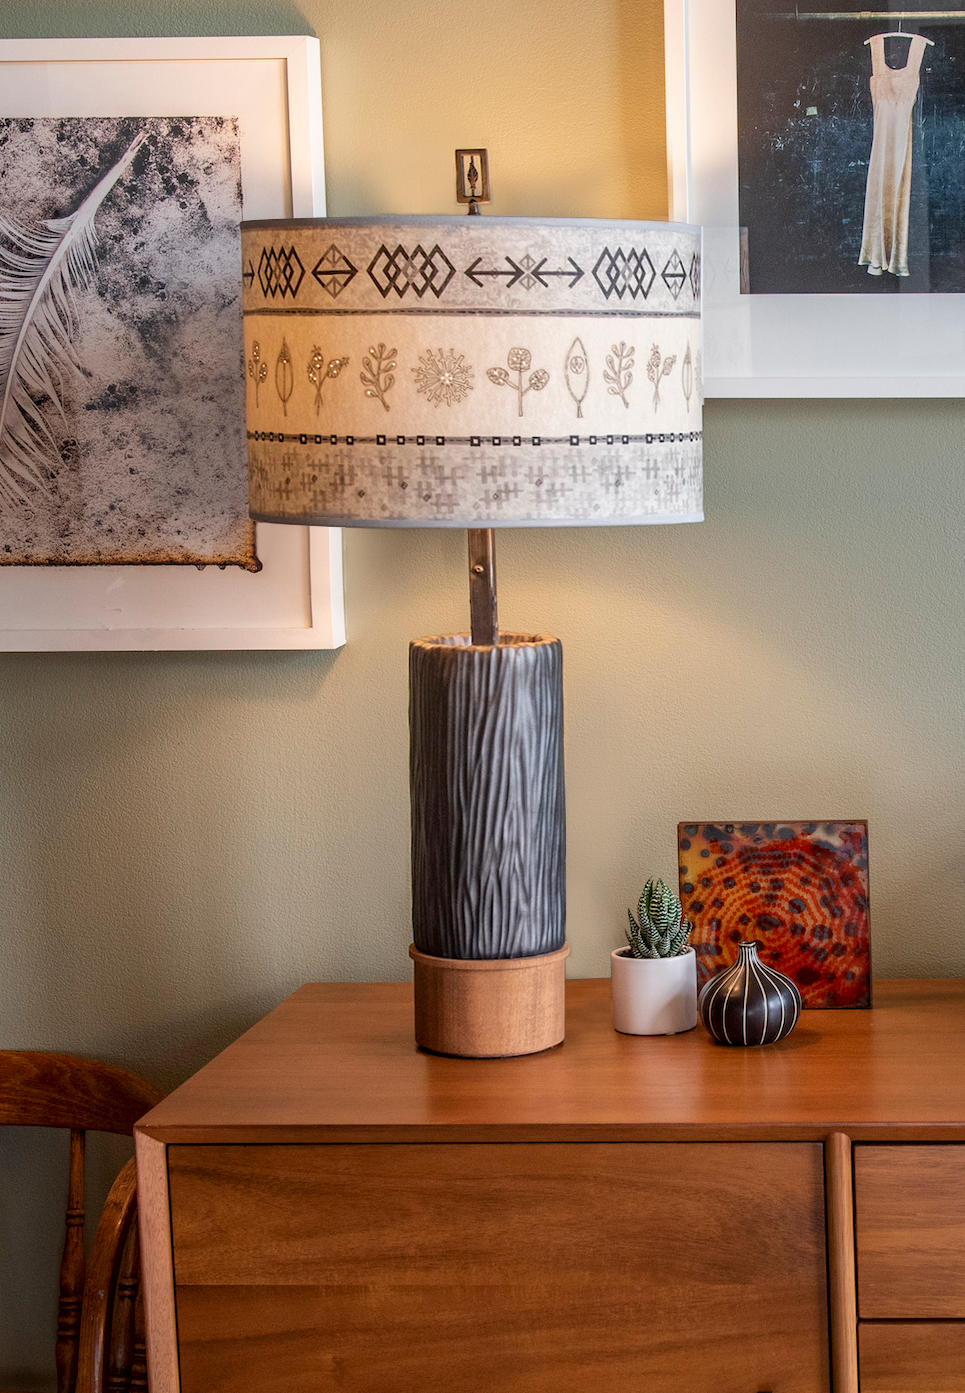 Ceramic and Wood Table Lamp with Large Drum Shade in Woven &amp; Sprig in Mist